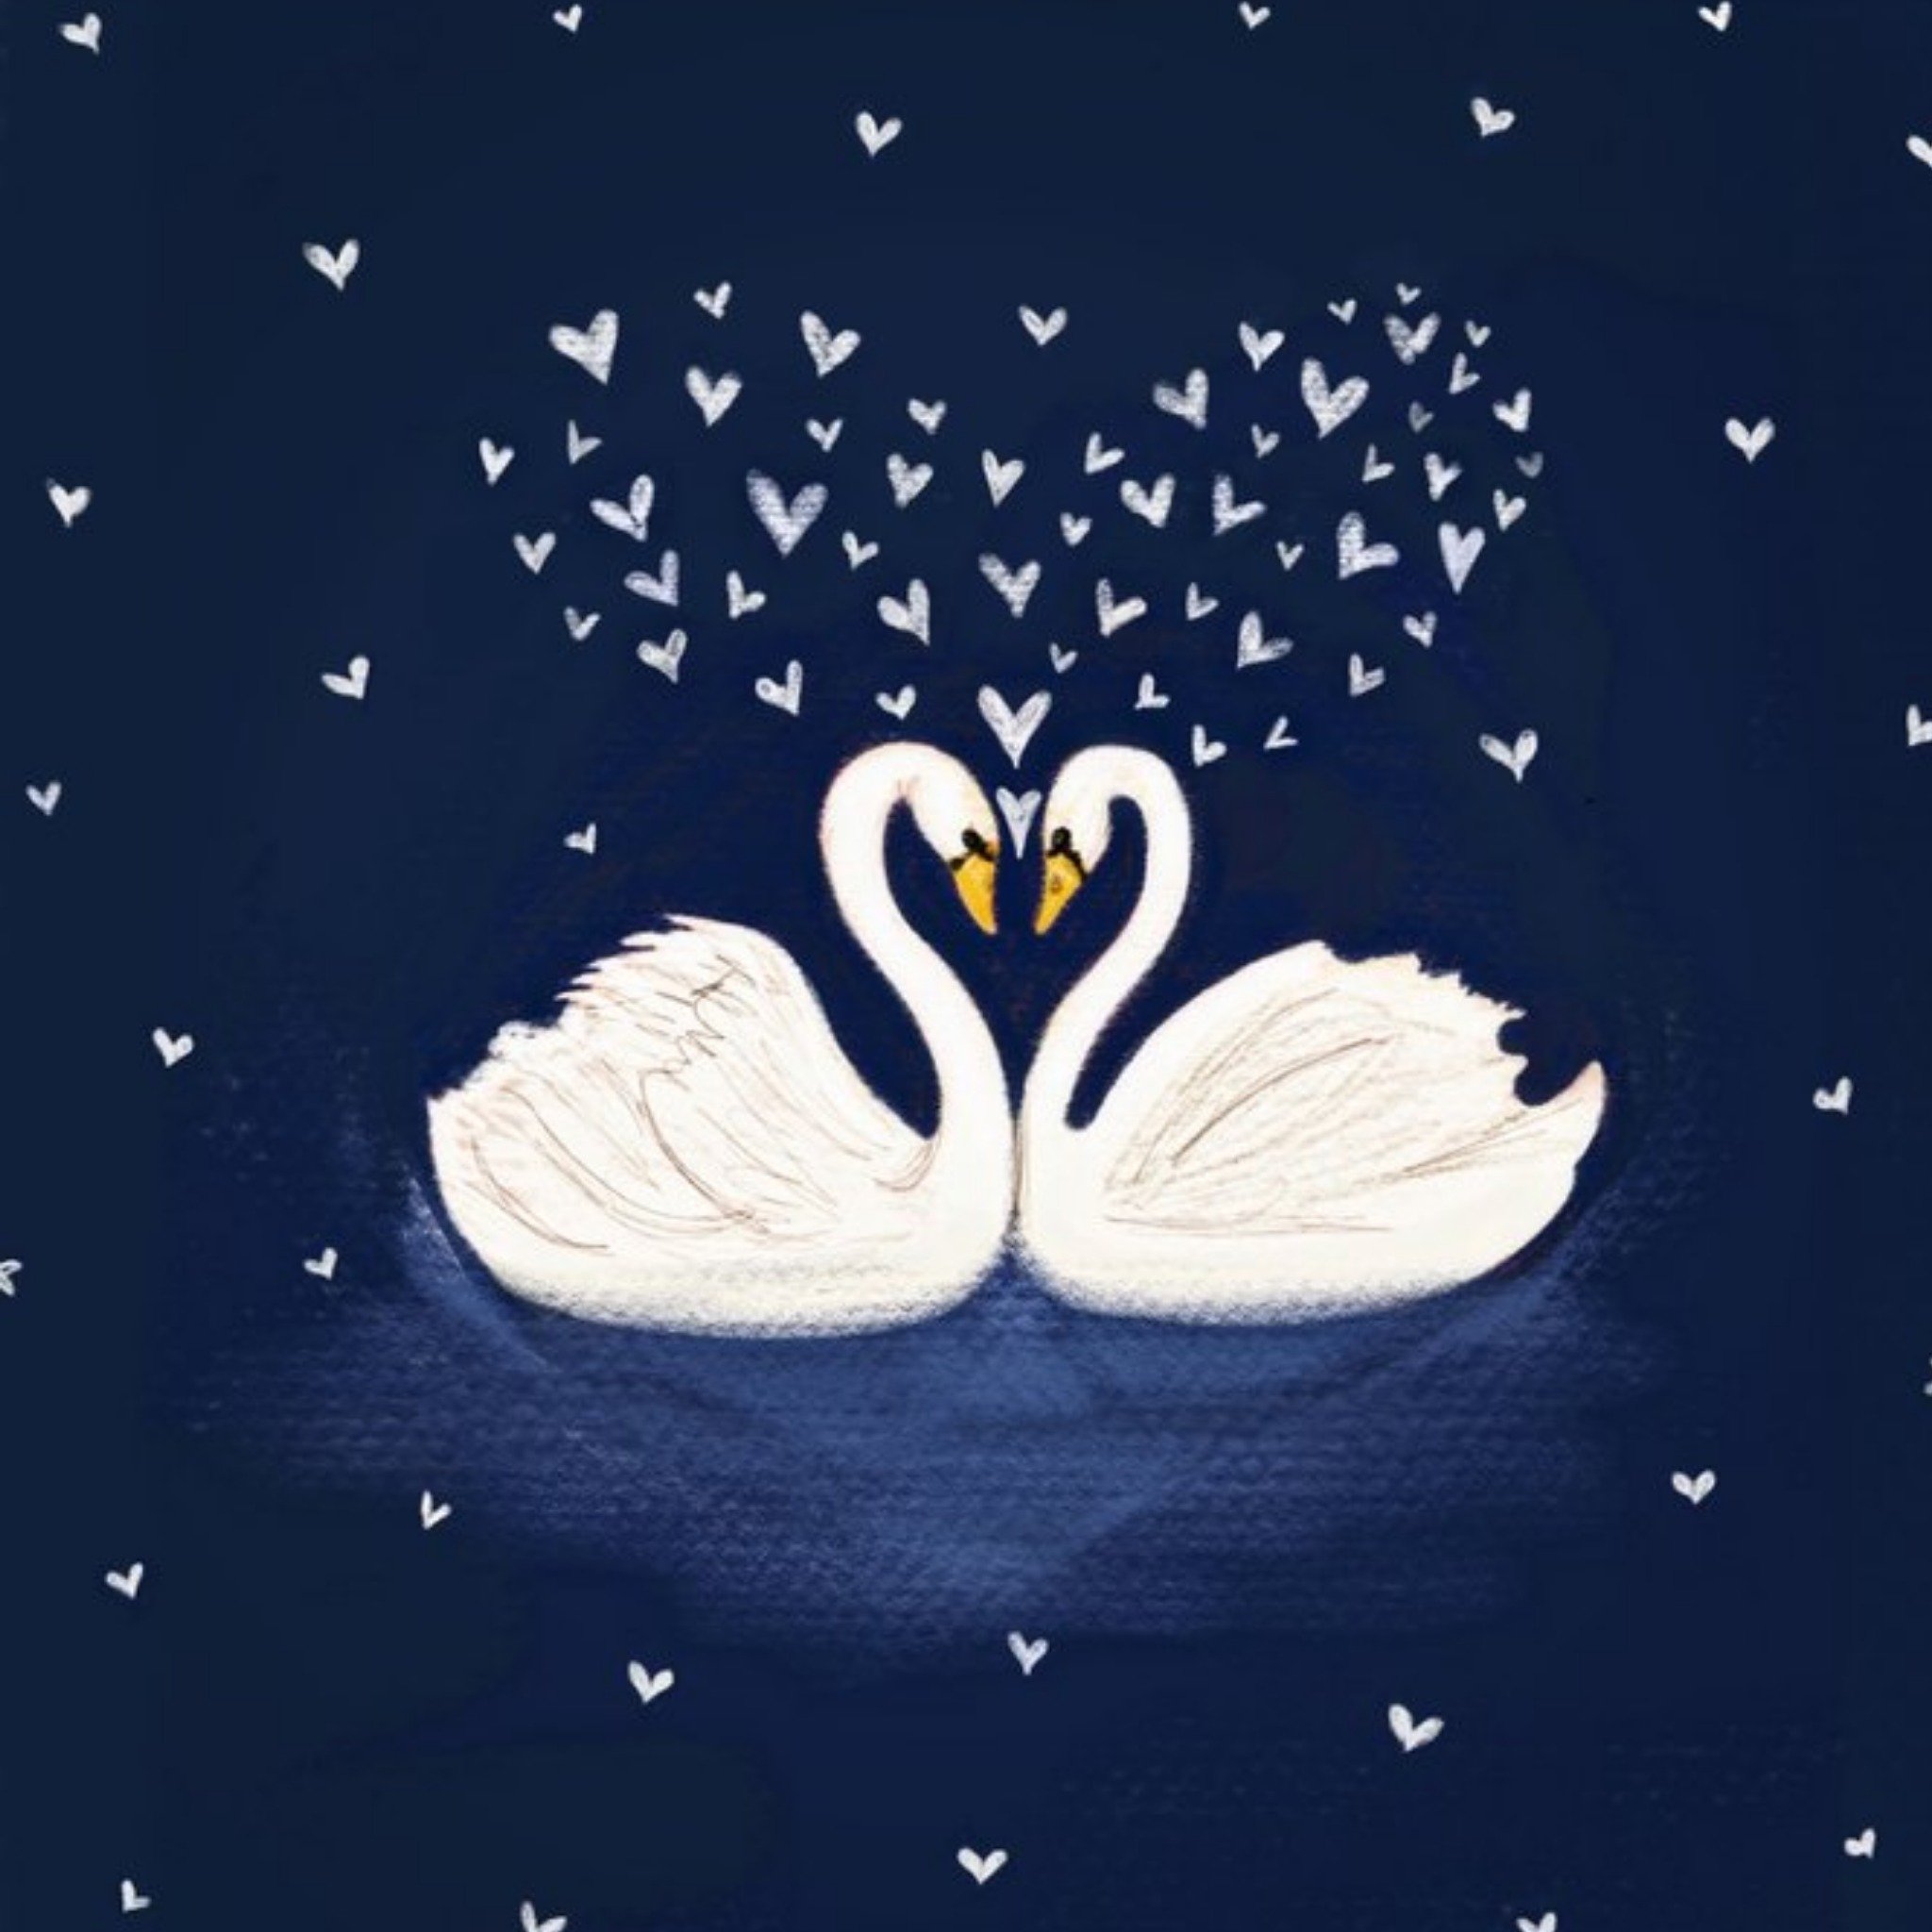 Moonpig Illustration Of Swans Surrounded By Hearts Anniversary Card, Square